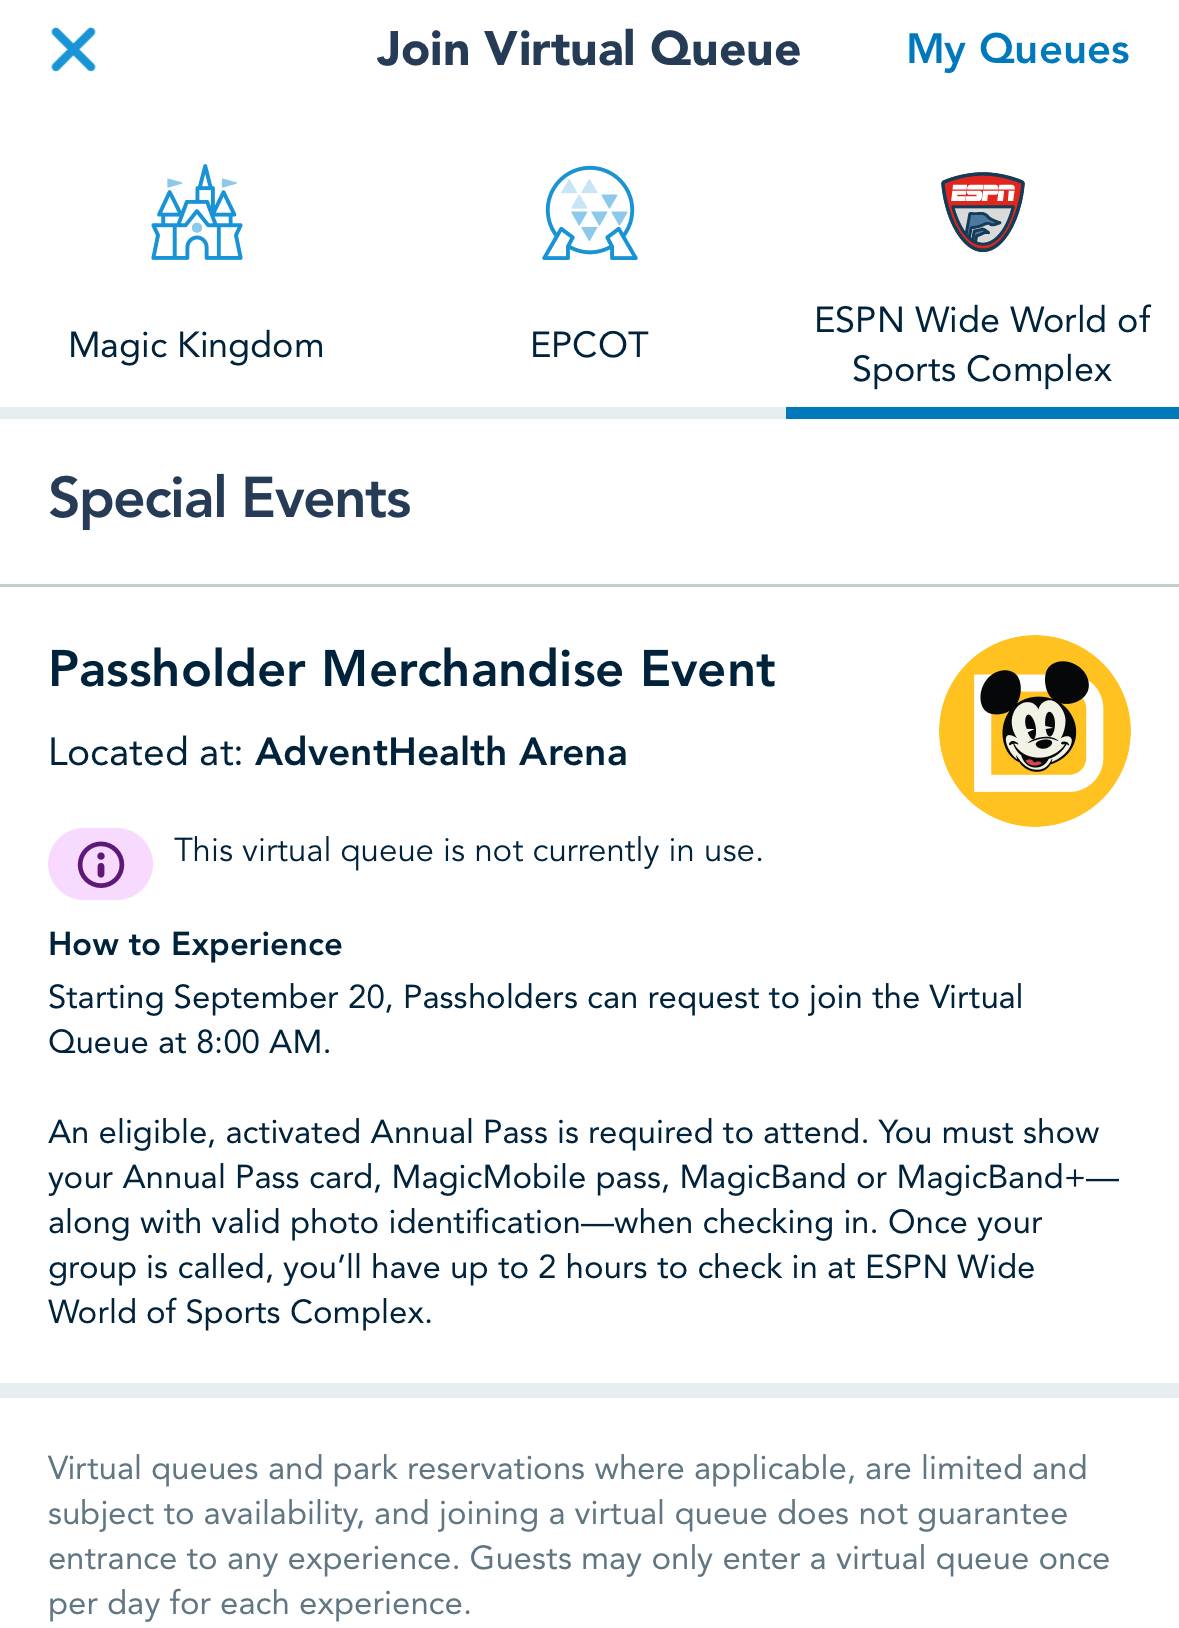 Virtual Queue added to My Disney Experience for Passholder exclusive merchandise event